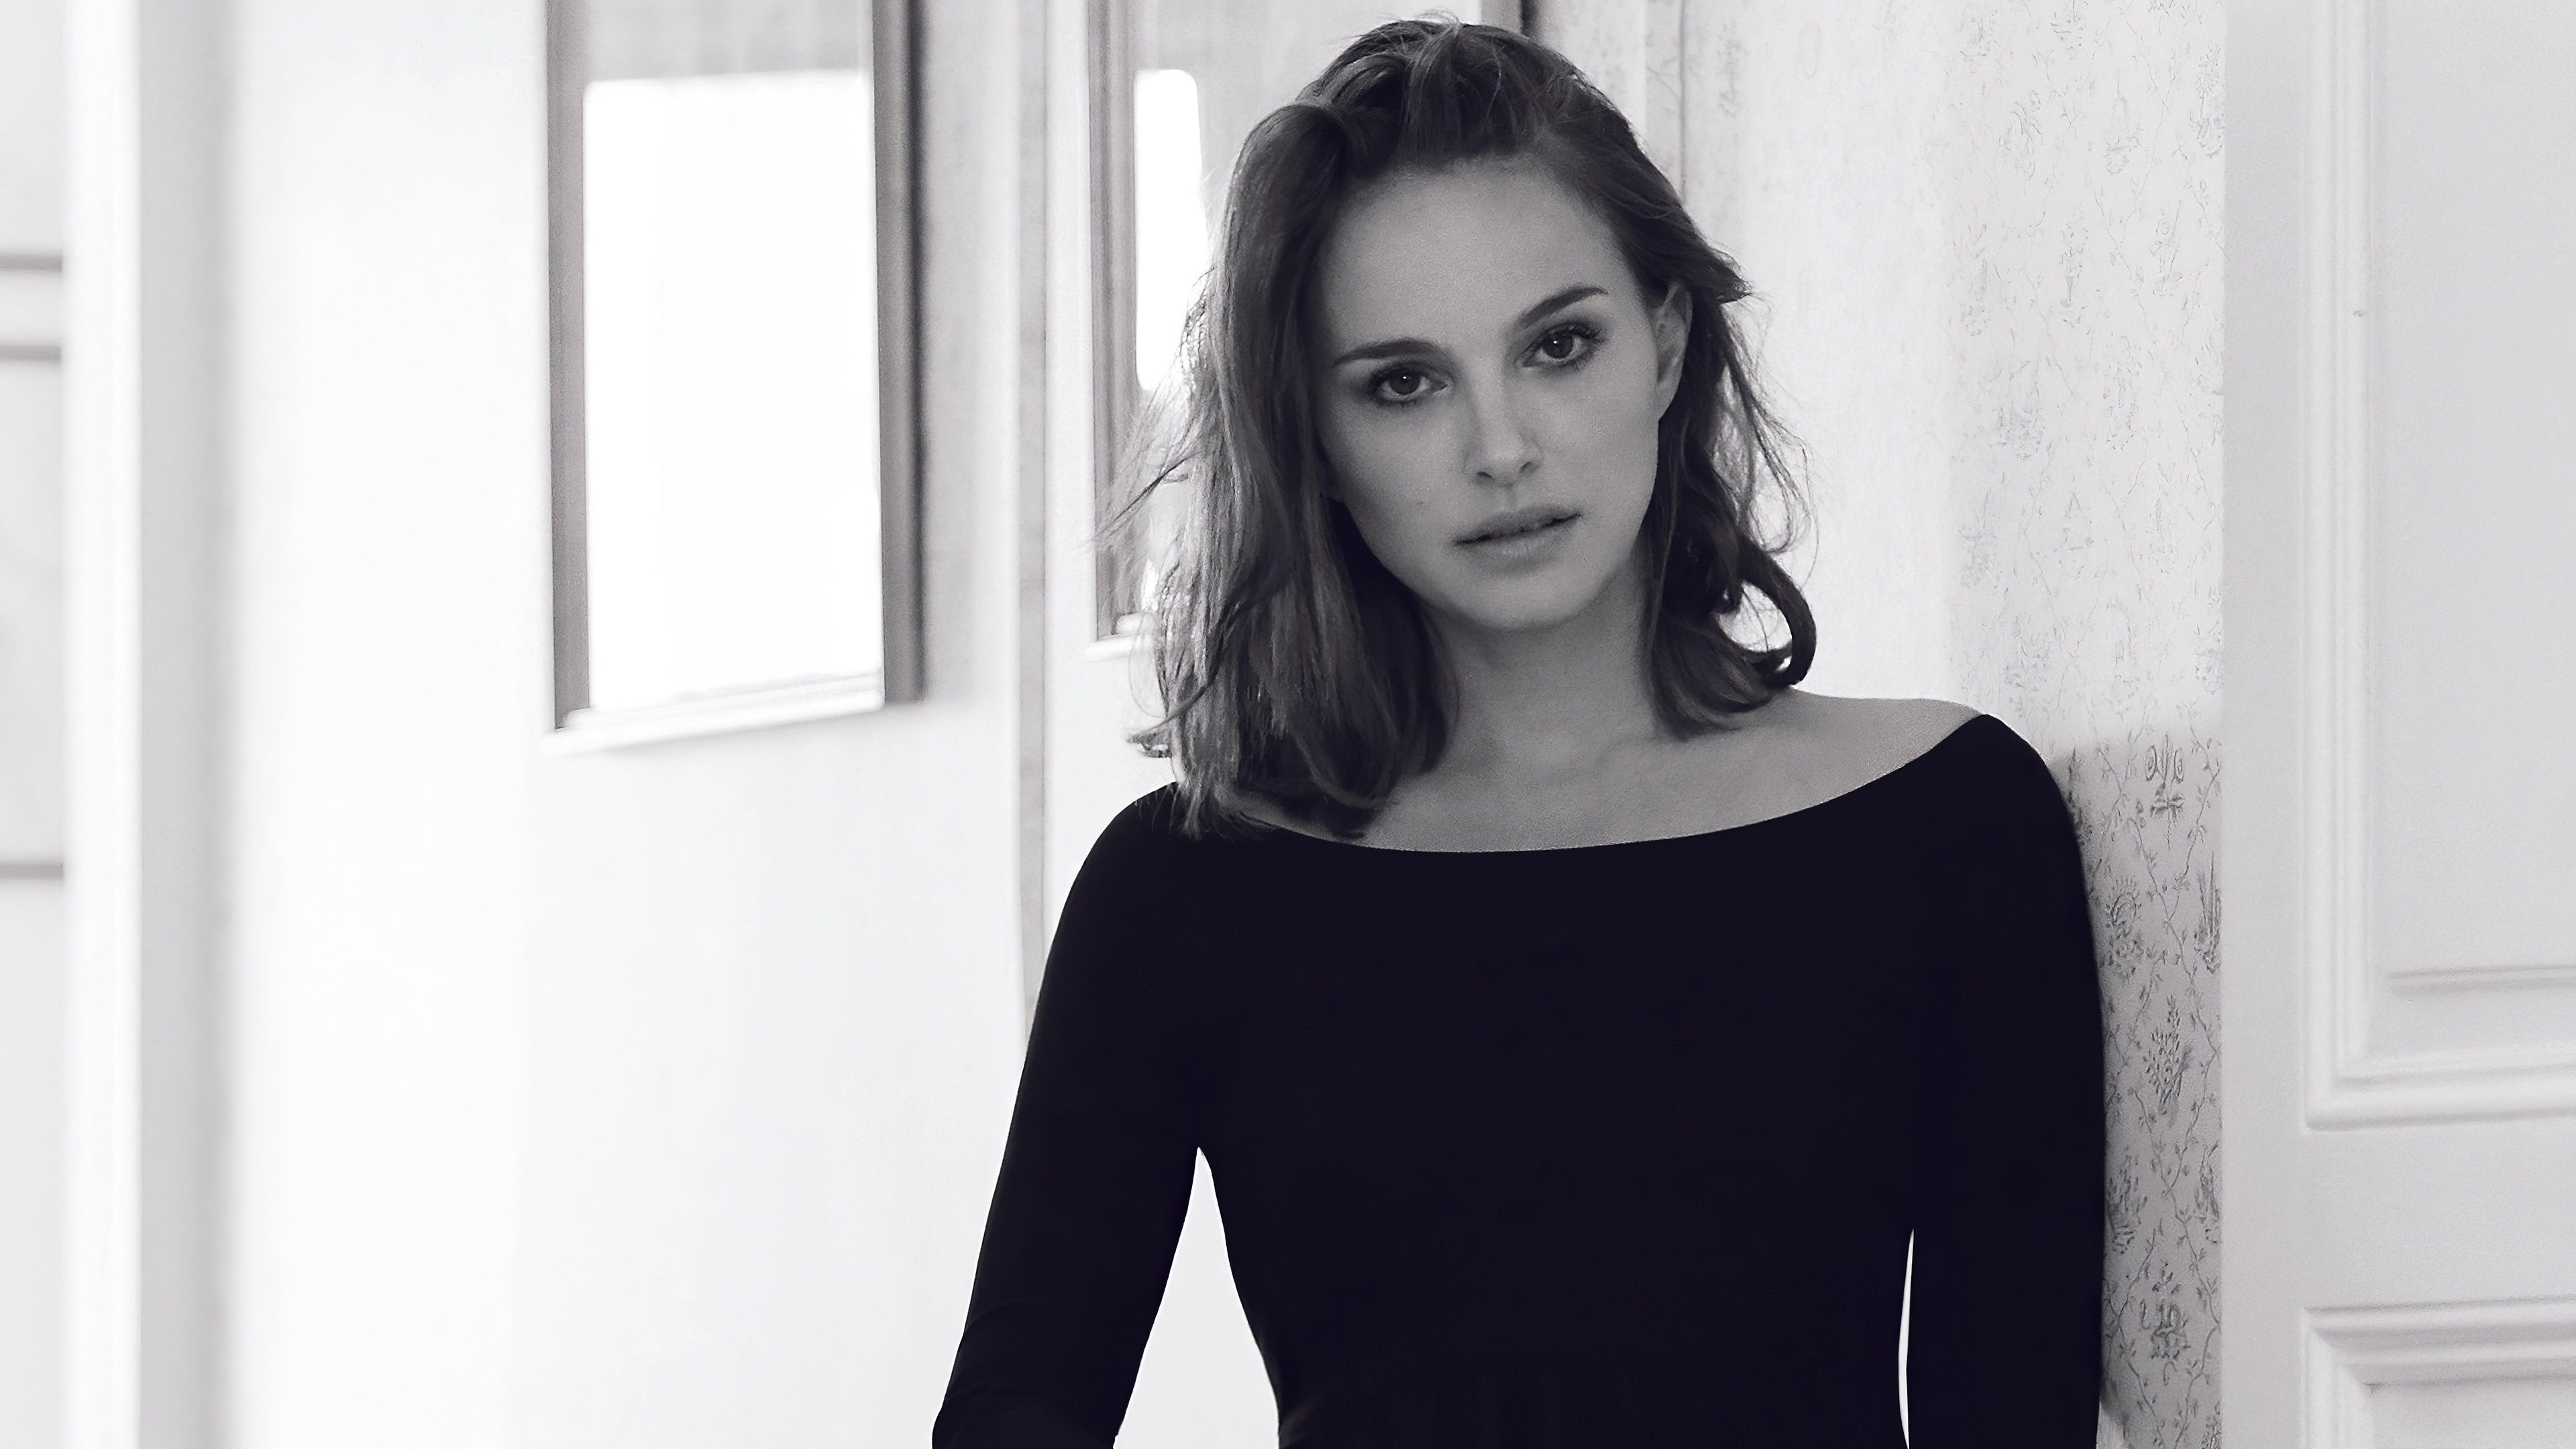 Natalie Portman Monochrome 4k, HD Celebrities, 4k Wallpapers, Images,  Backgrounds, Photos and Pictures